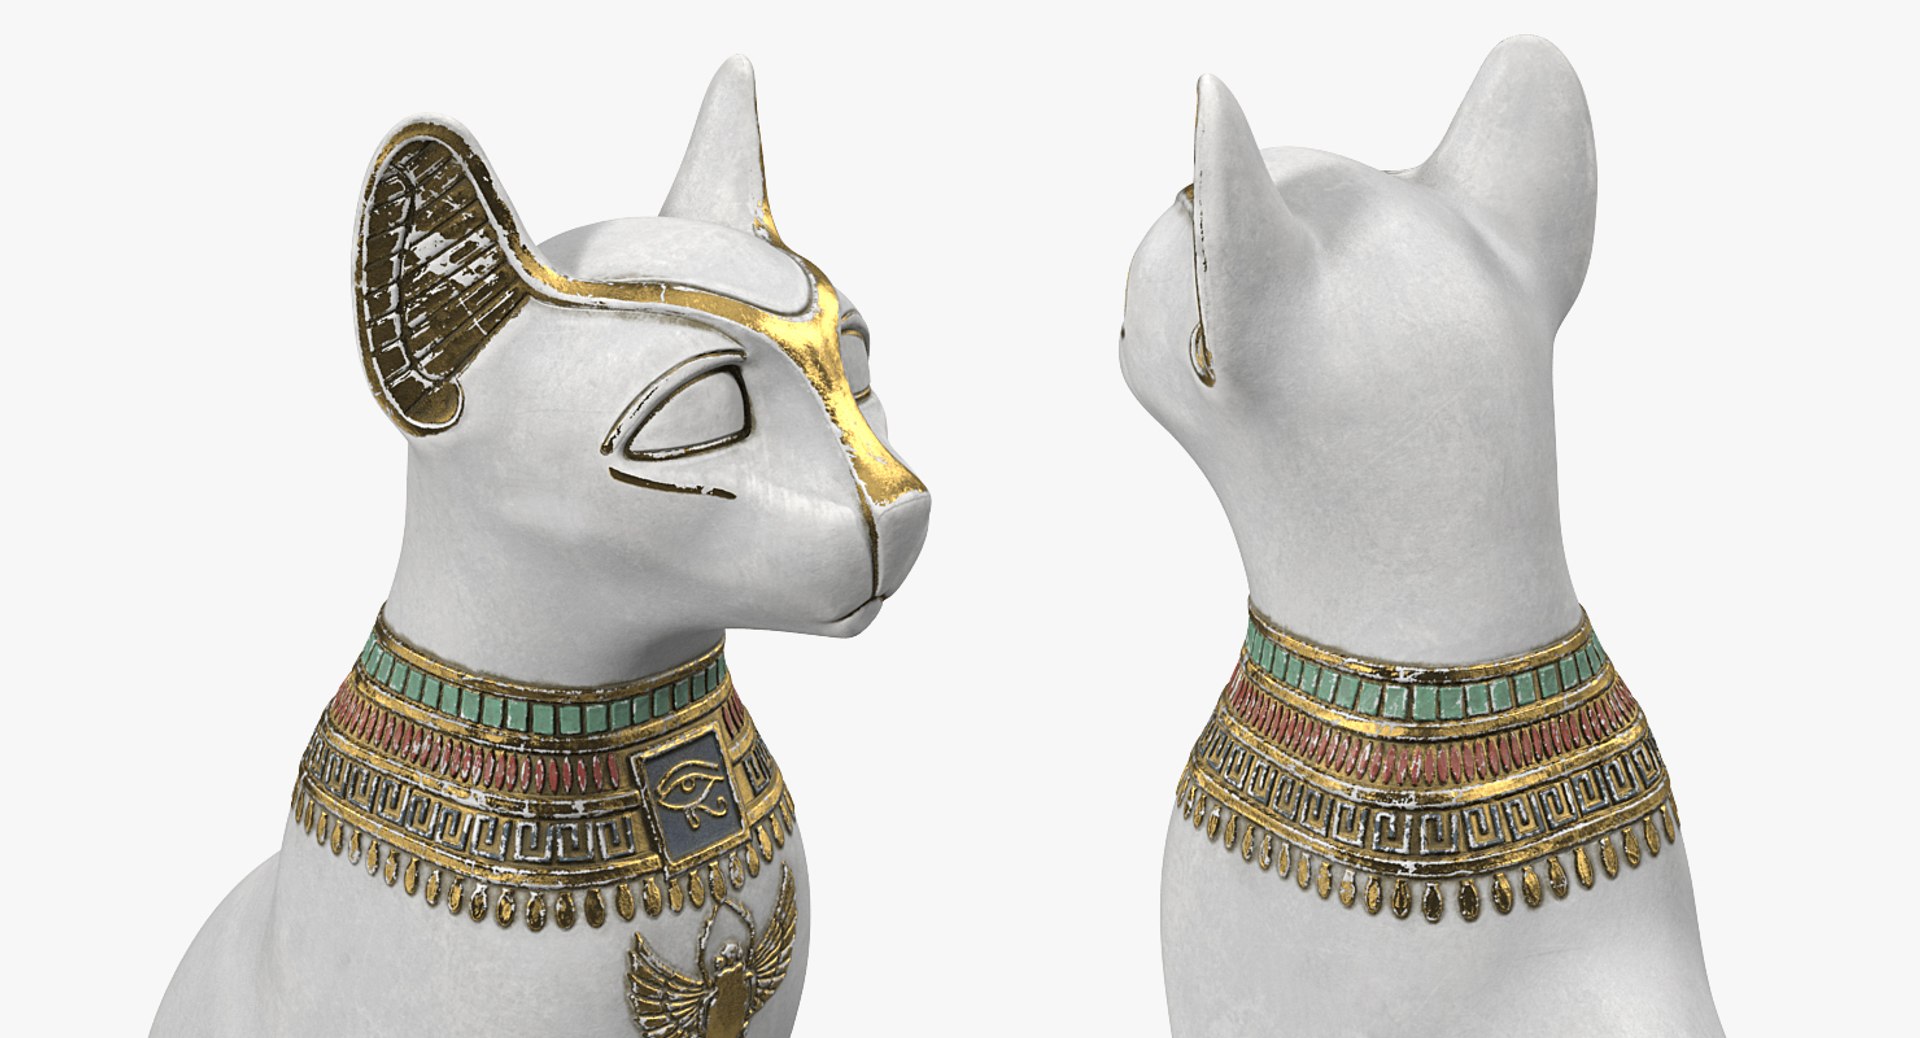 Egyptian Bastet Cat Statue ancient Egypt Goddess Gold Cat Collectible Made  in Egypt -  Canada